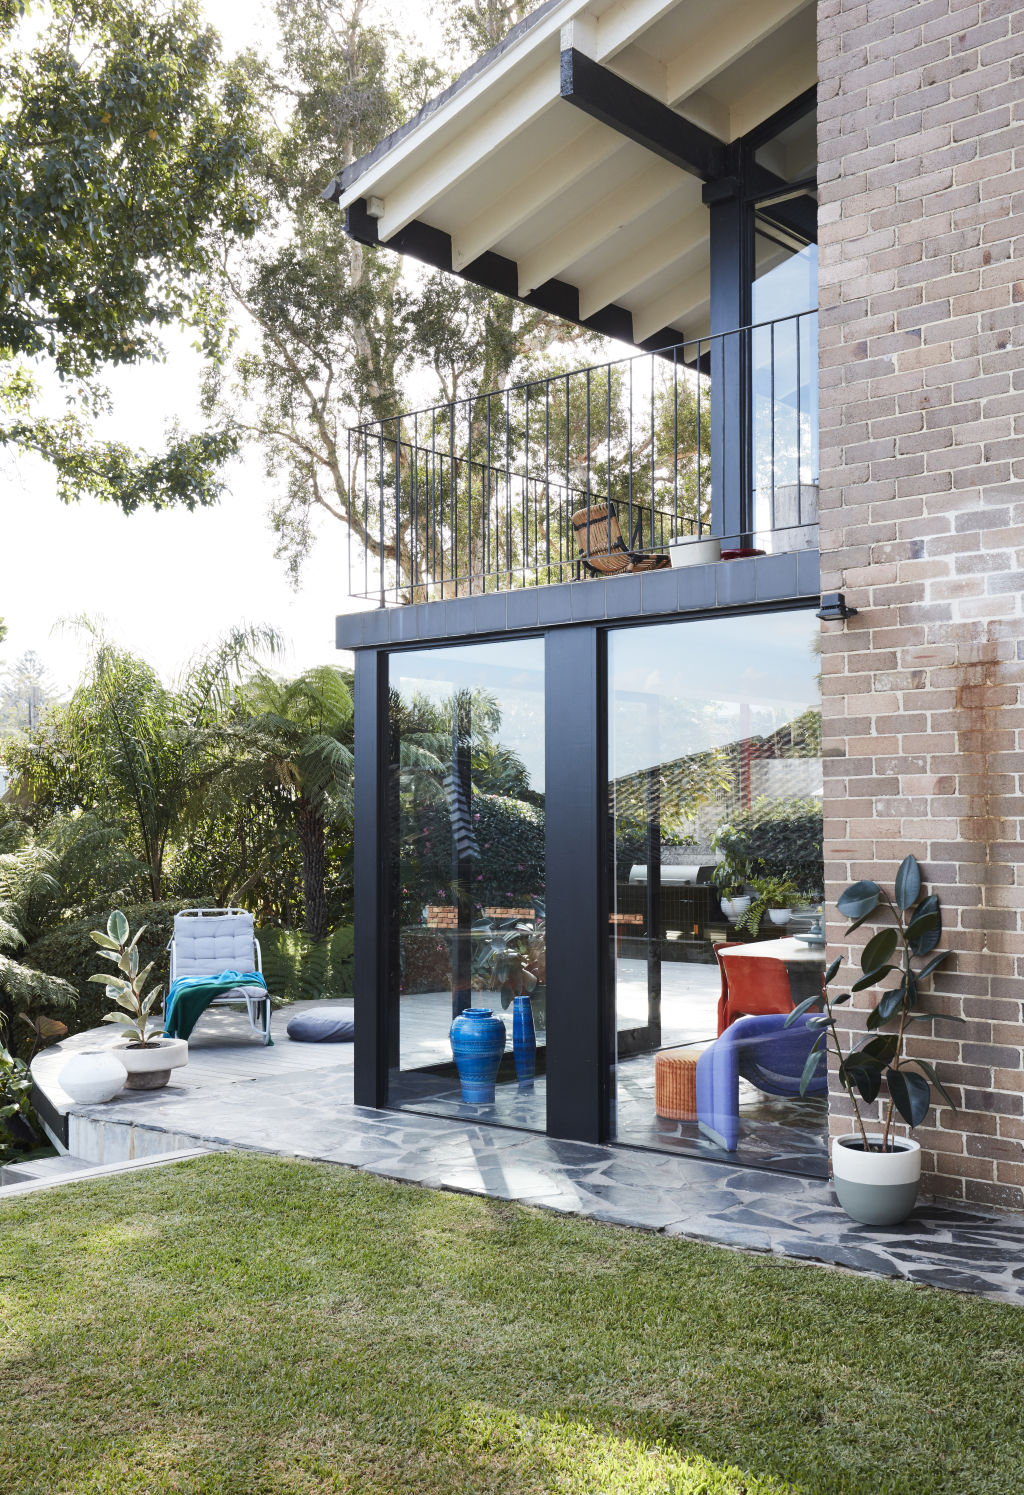 The previously dysfunctional dwelling is now an artful home. Photo: Prue Ruscoe